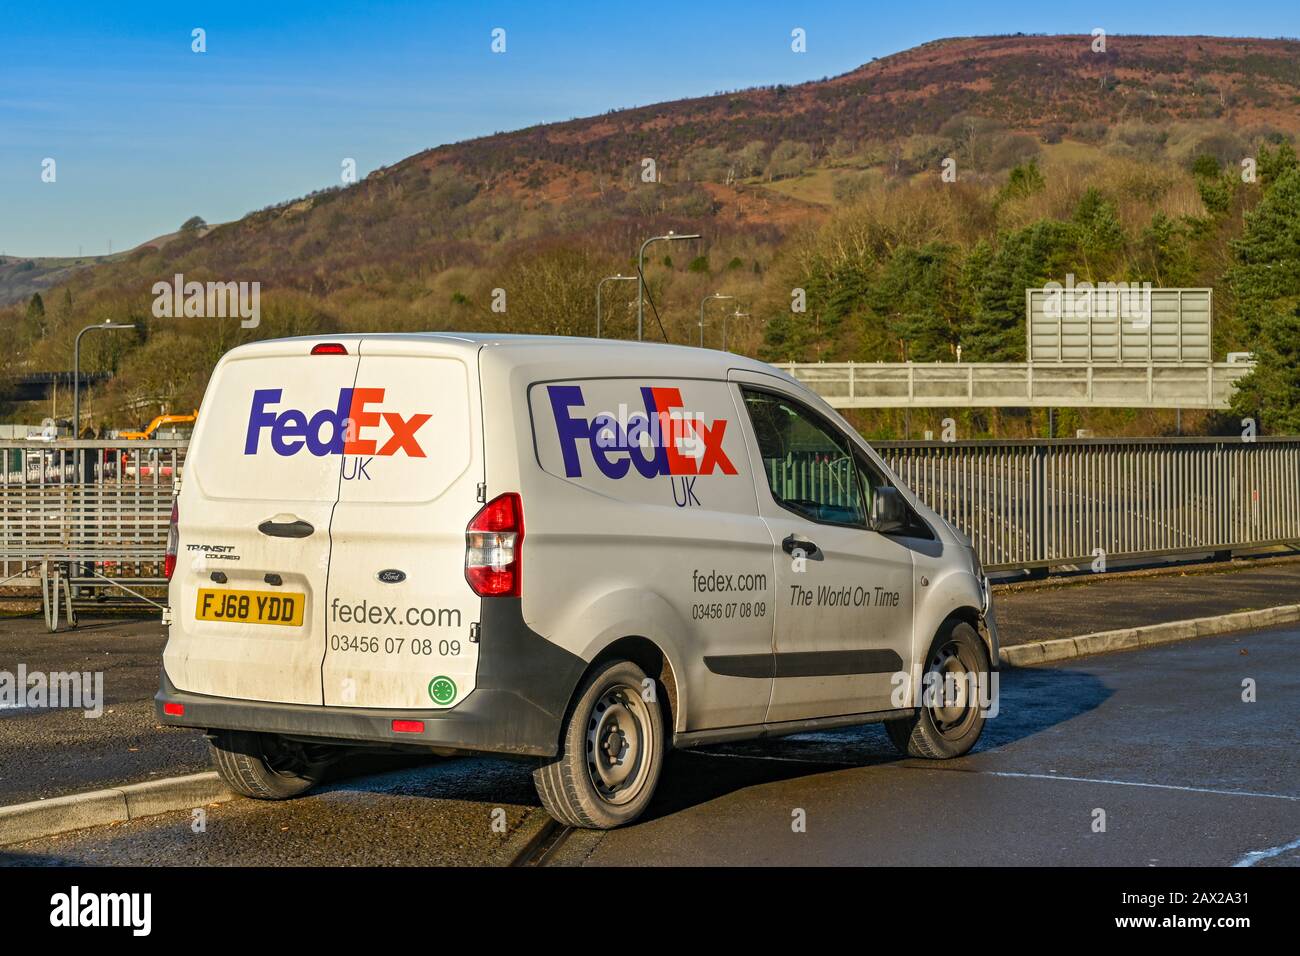 CARDIFF, WALES - JANUARY 2020: FedEx delivery van parked on a road near Cardiff Stock Photo